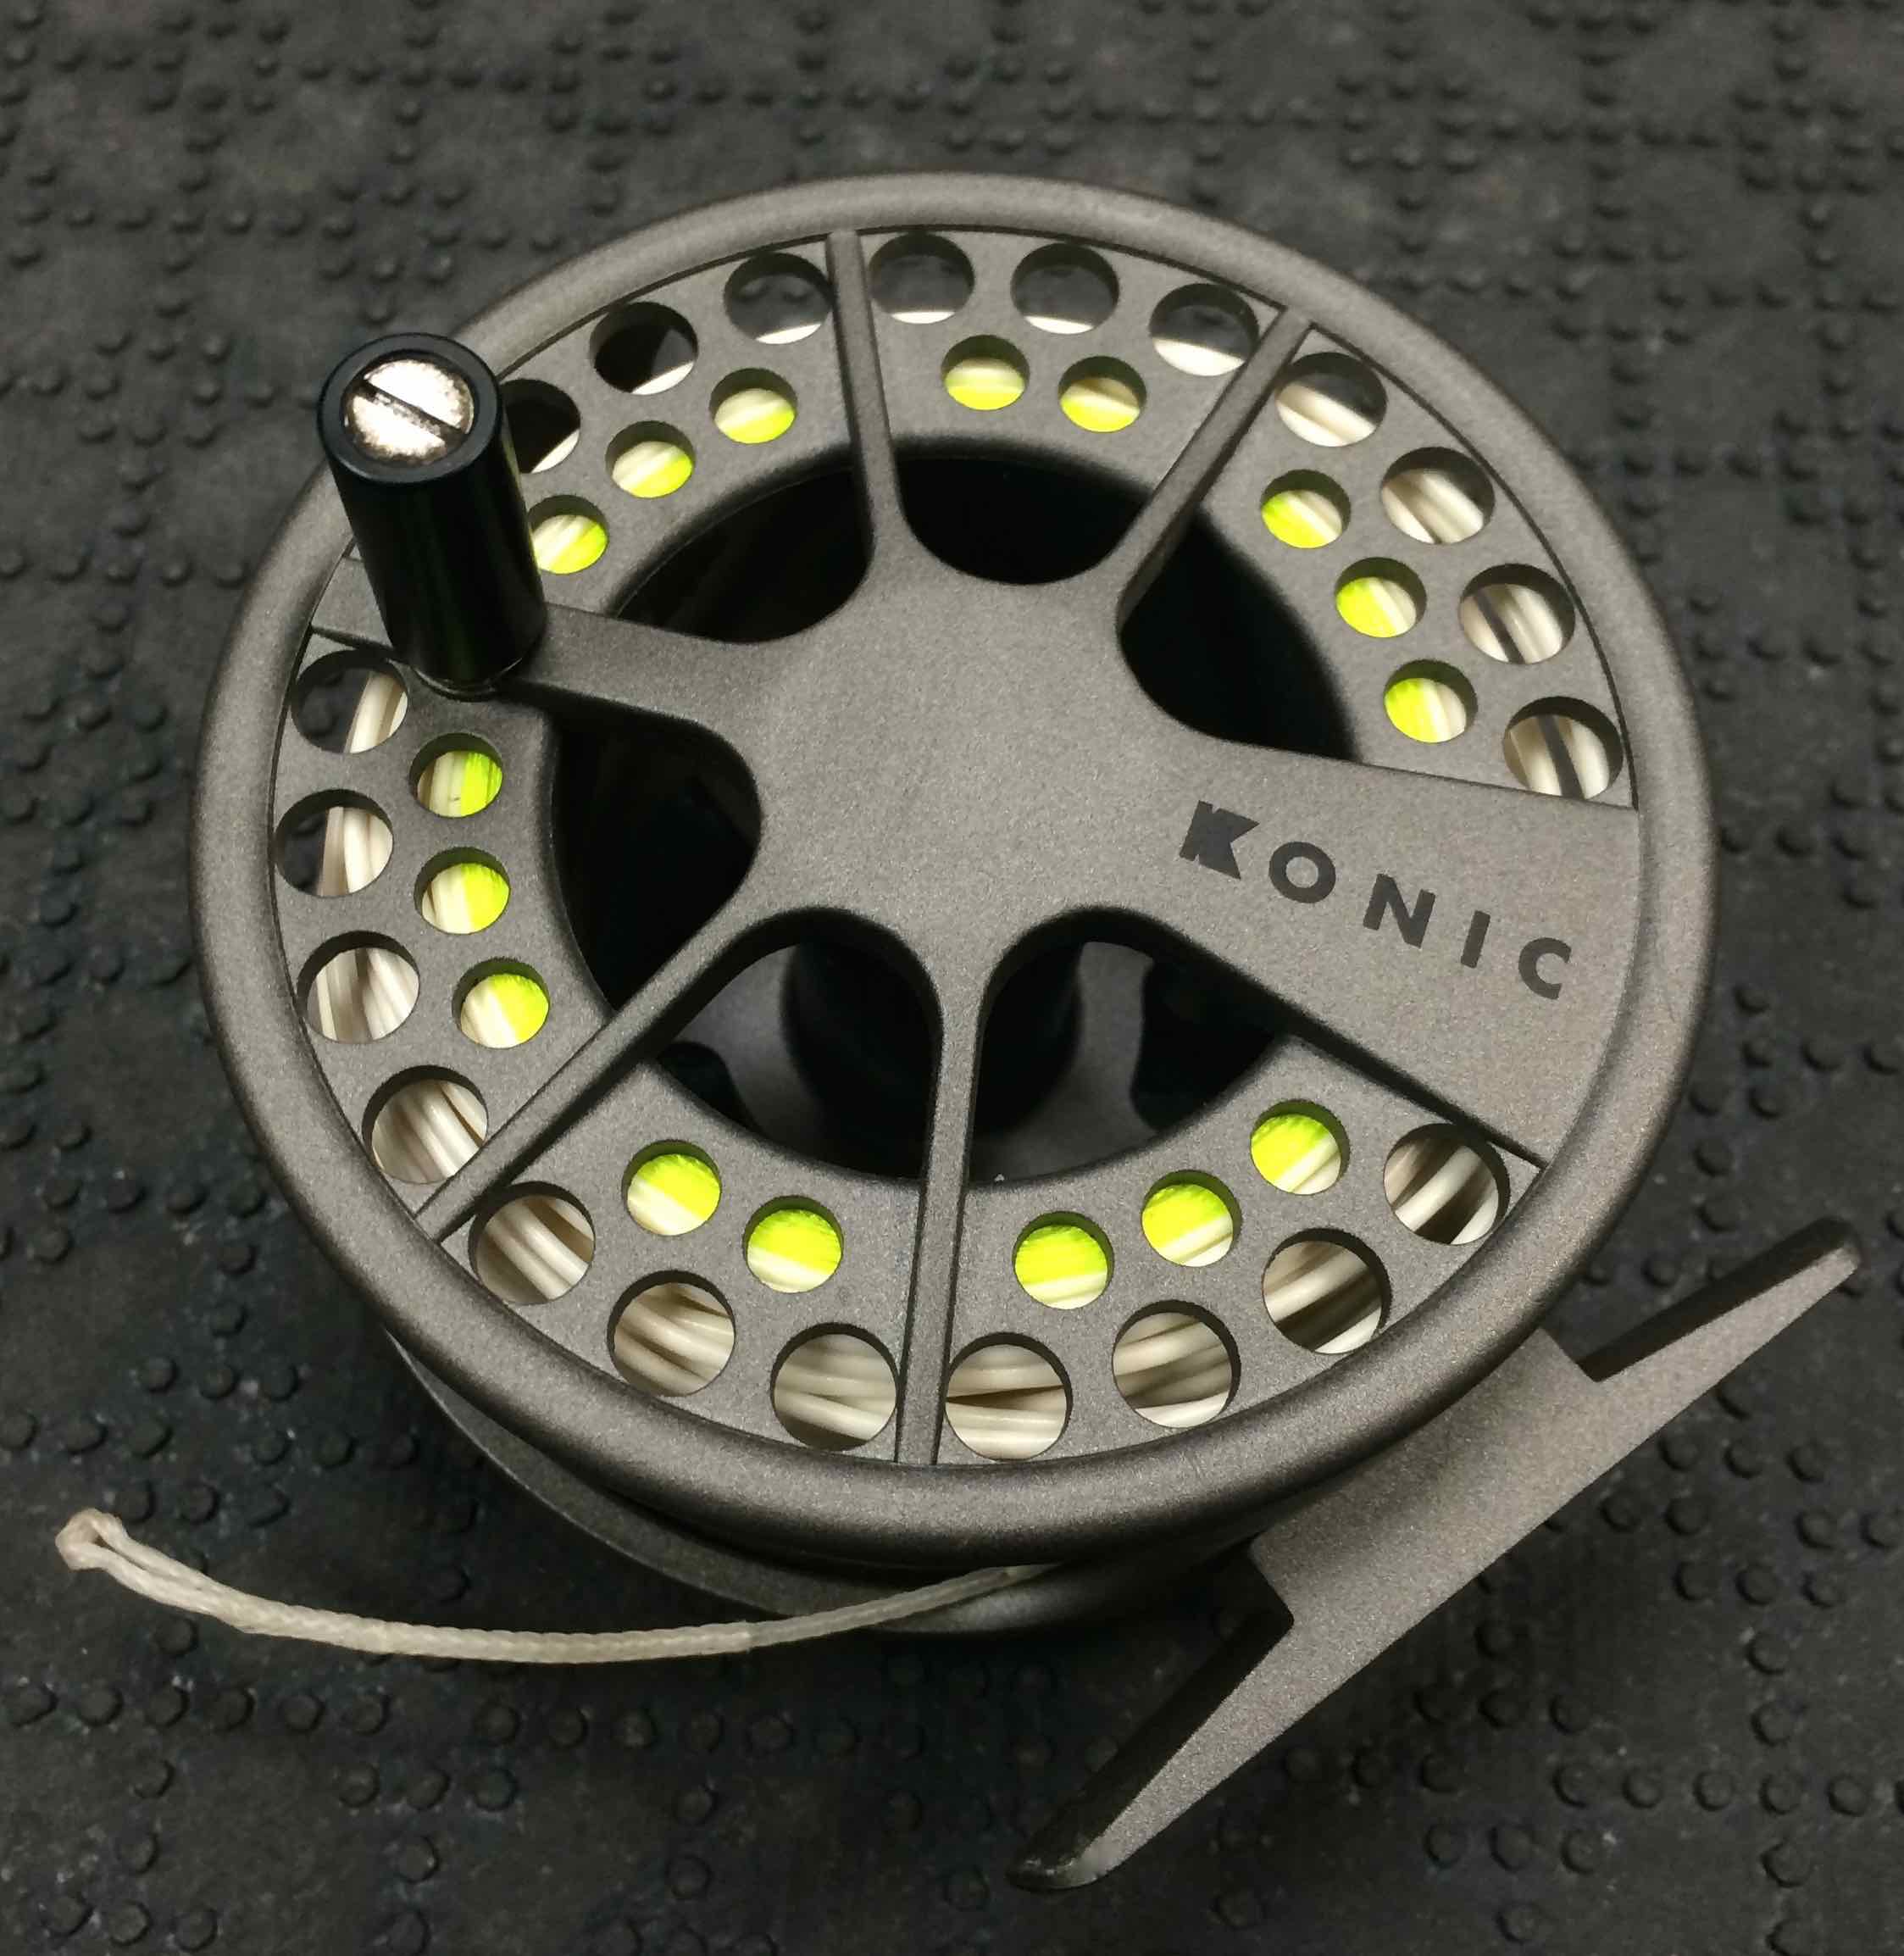 Lamson Konic 20 – The First Cast – Hook, Line and Sinker's Fly Fishing Shop